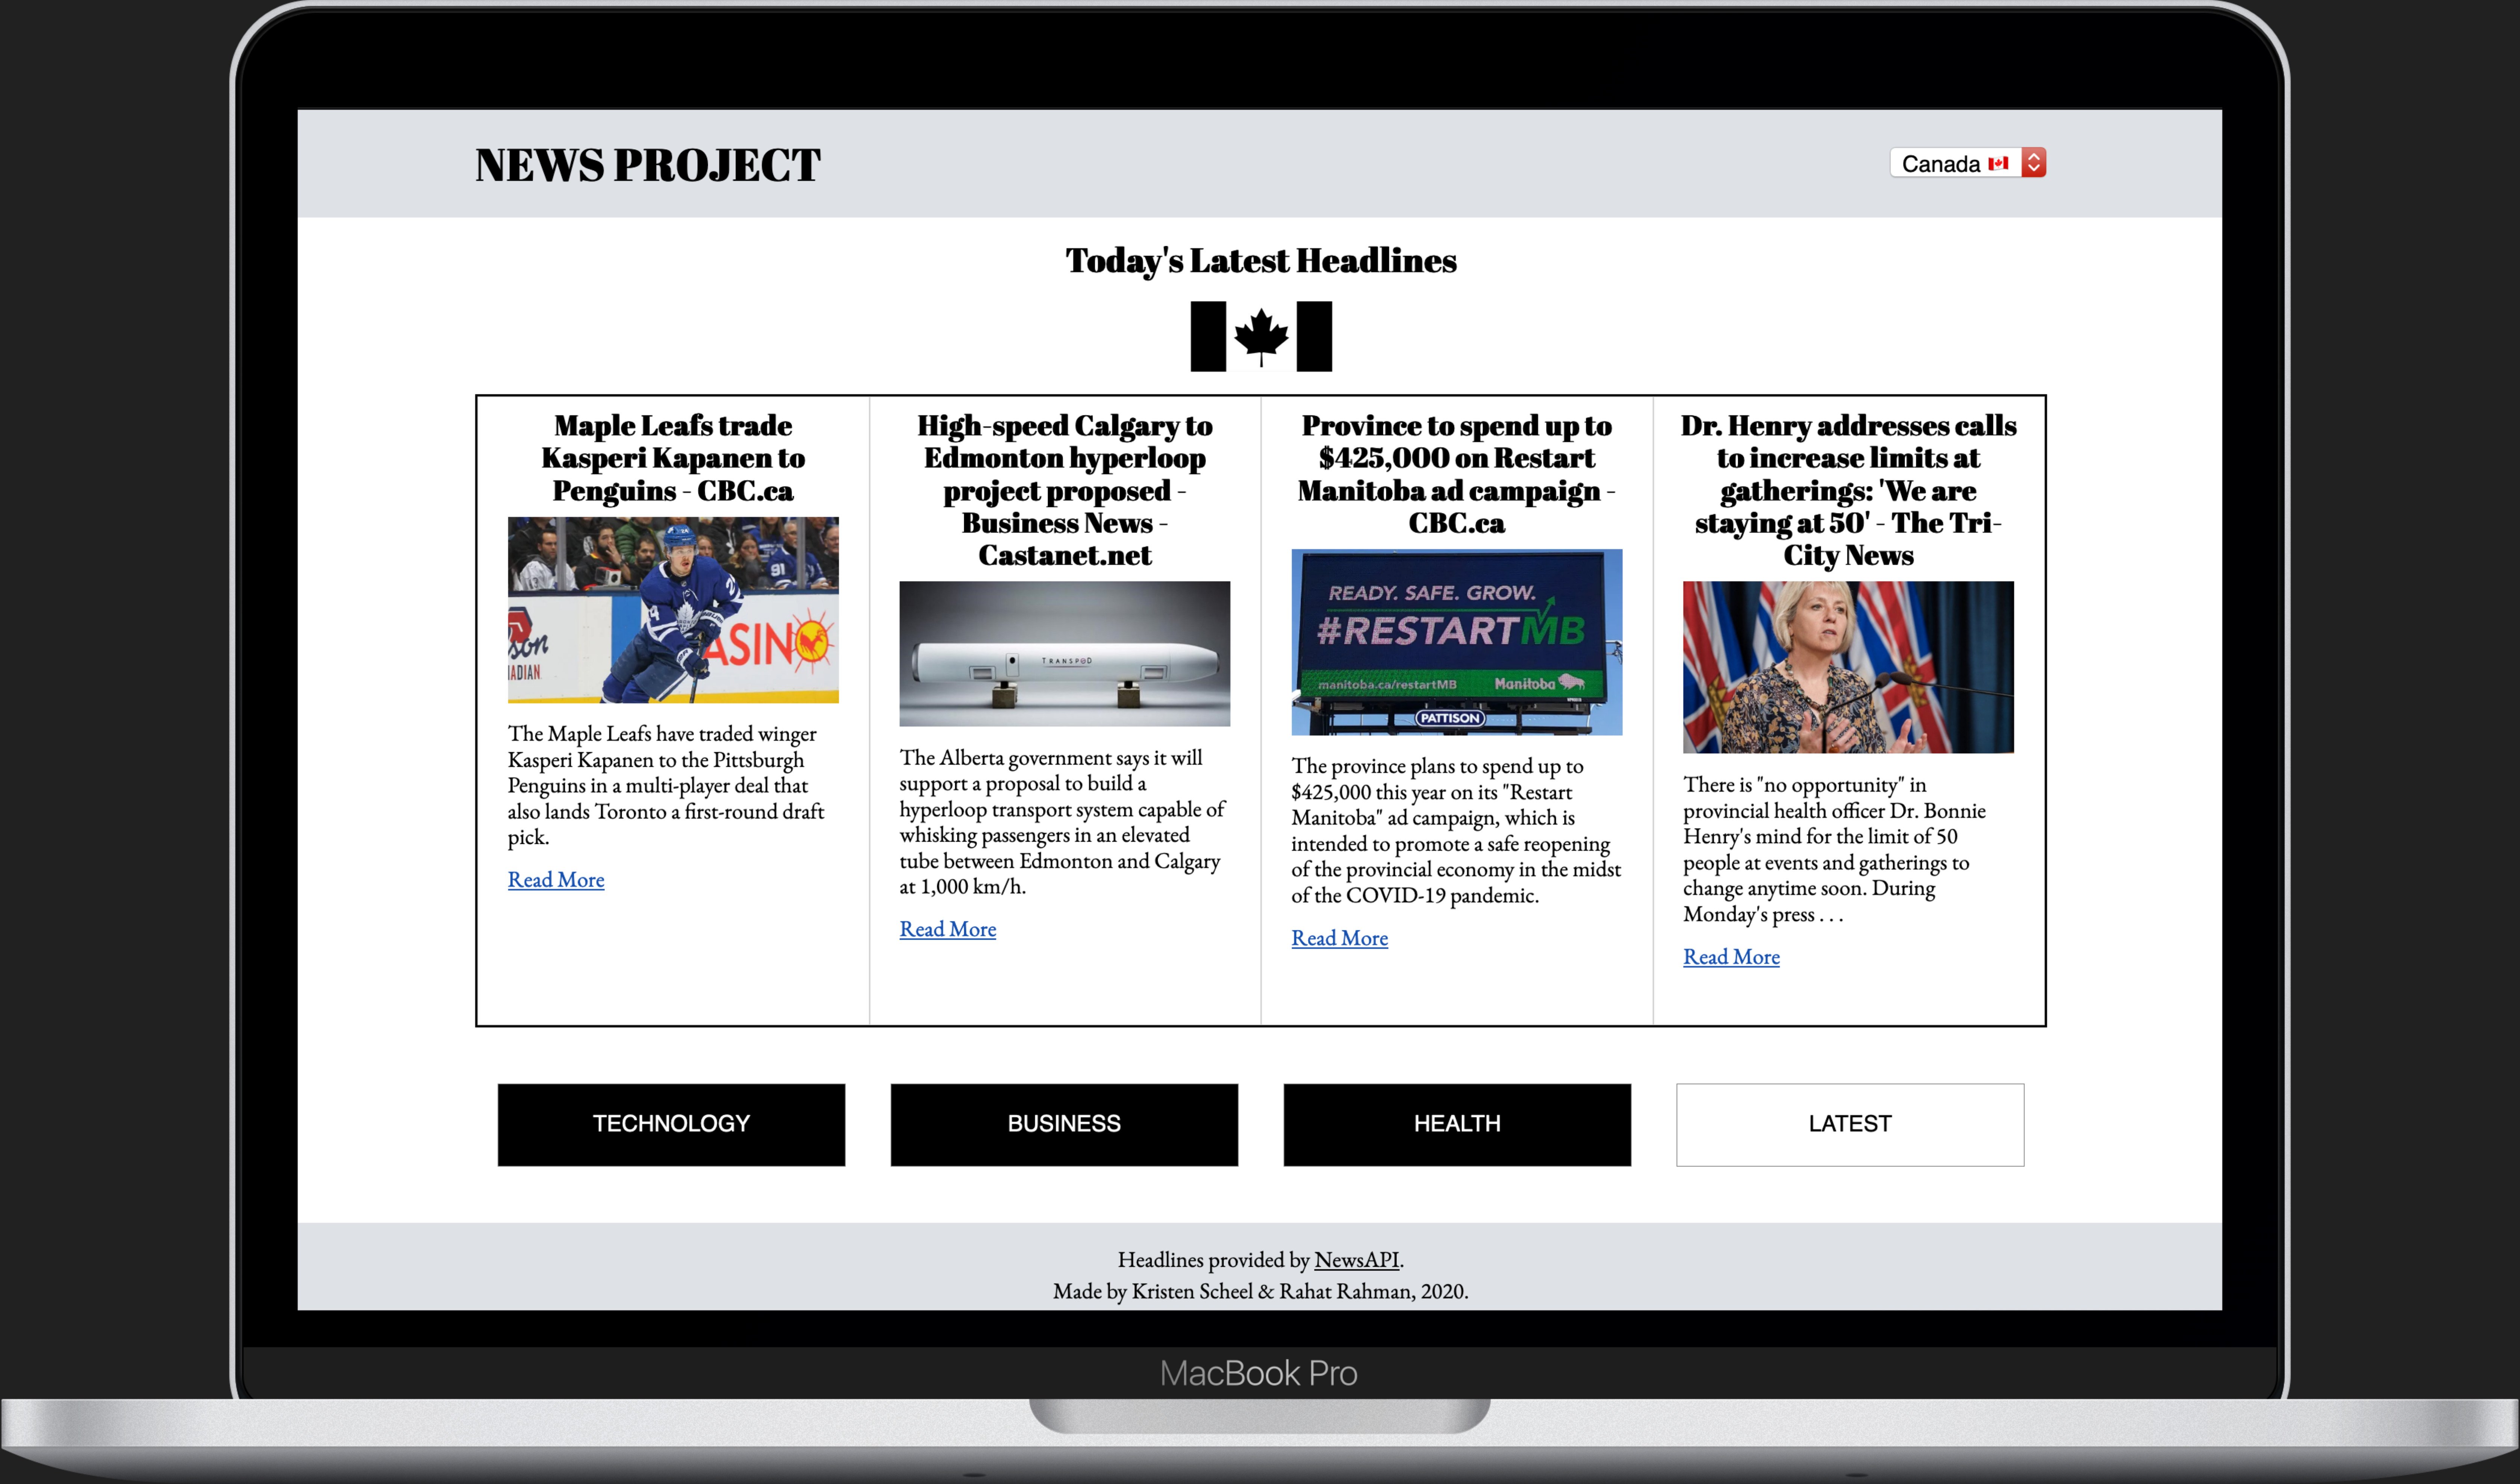 Screenshot of News Project showing the latest Canadian headlines.